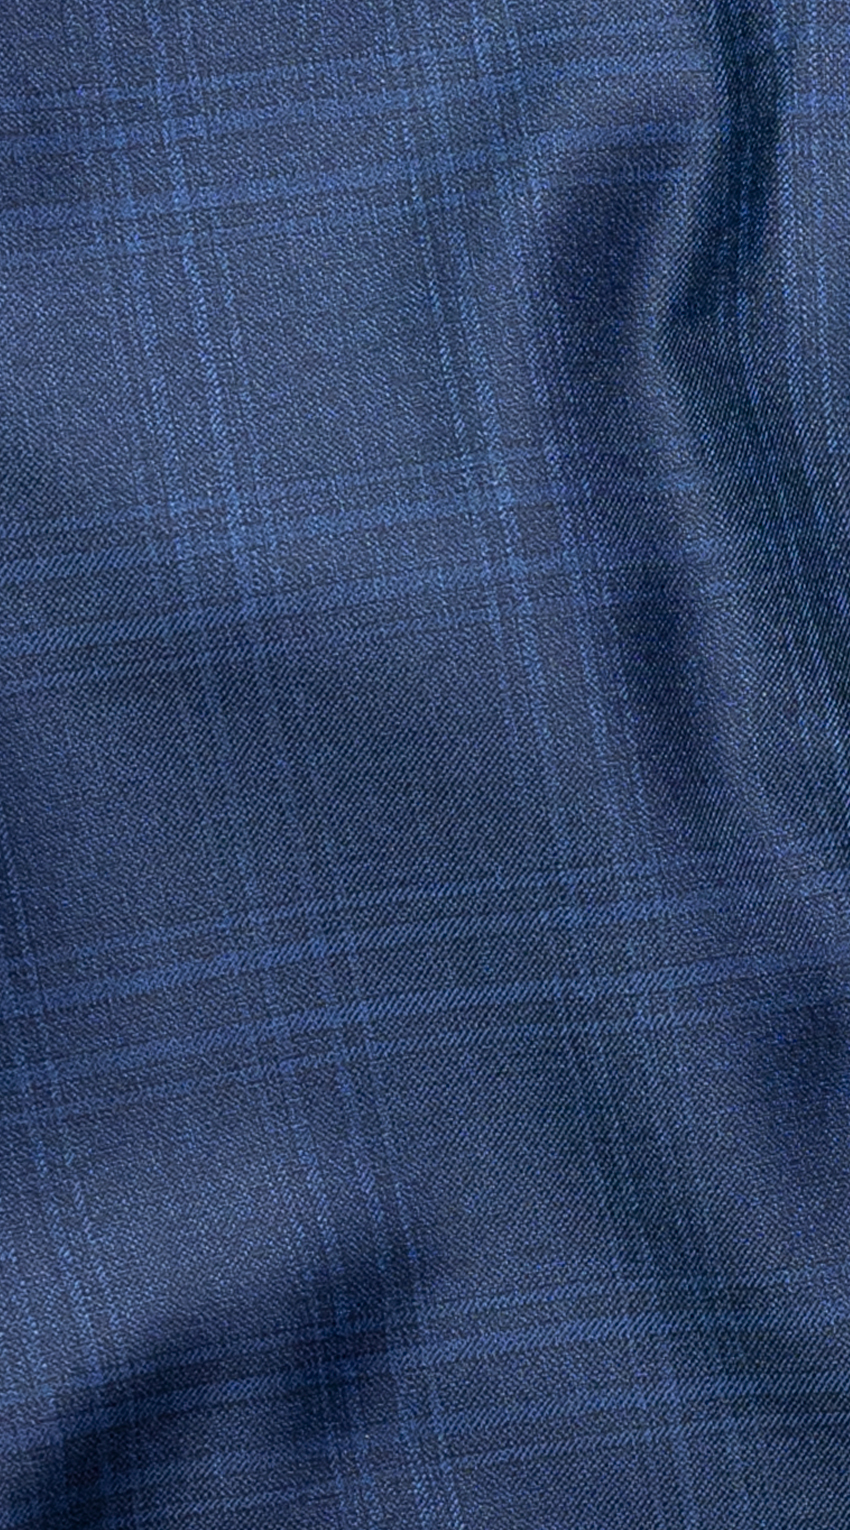 Navy Blue Check Suit by SUITABLEE